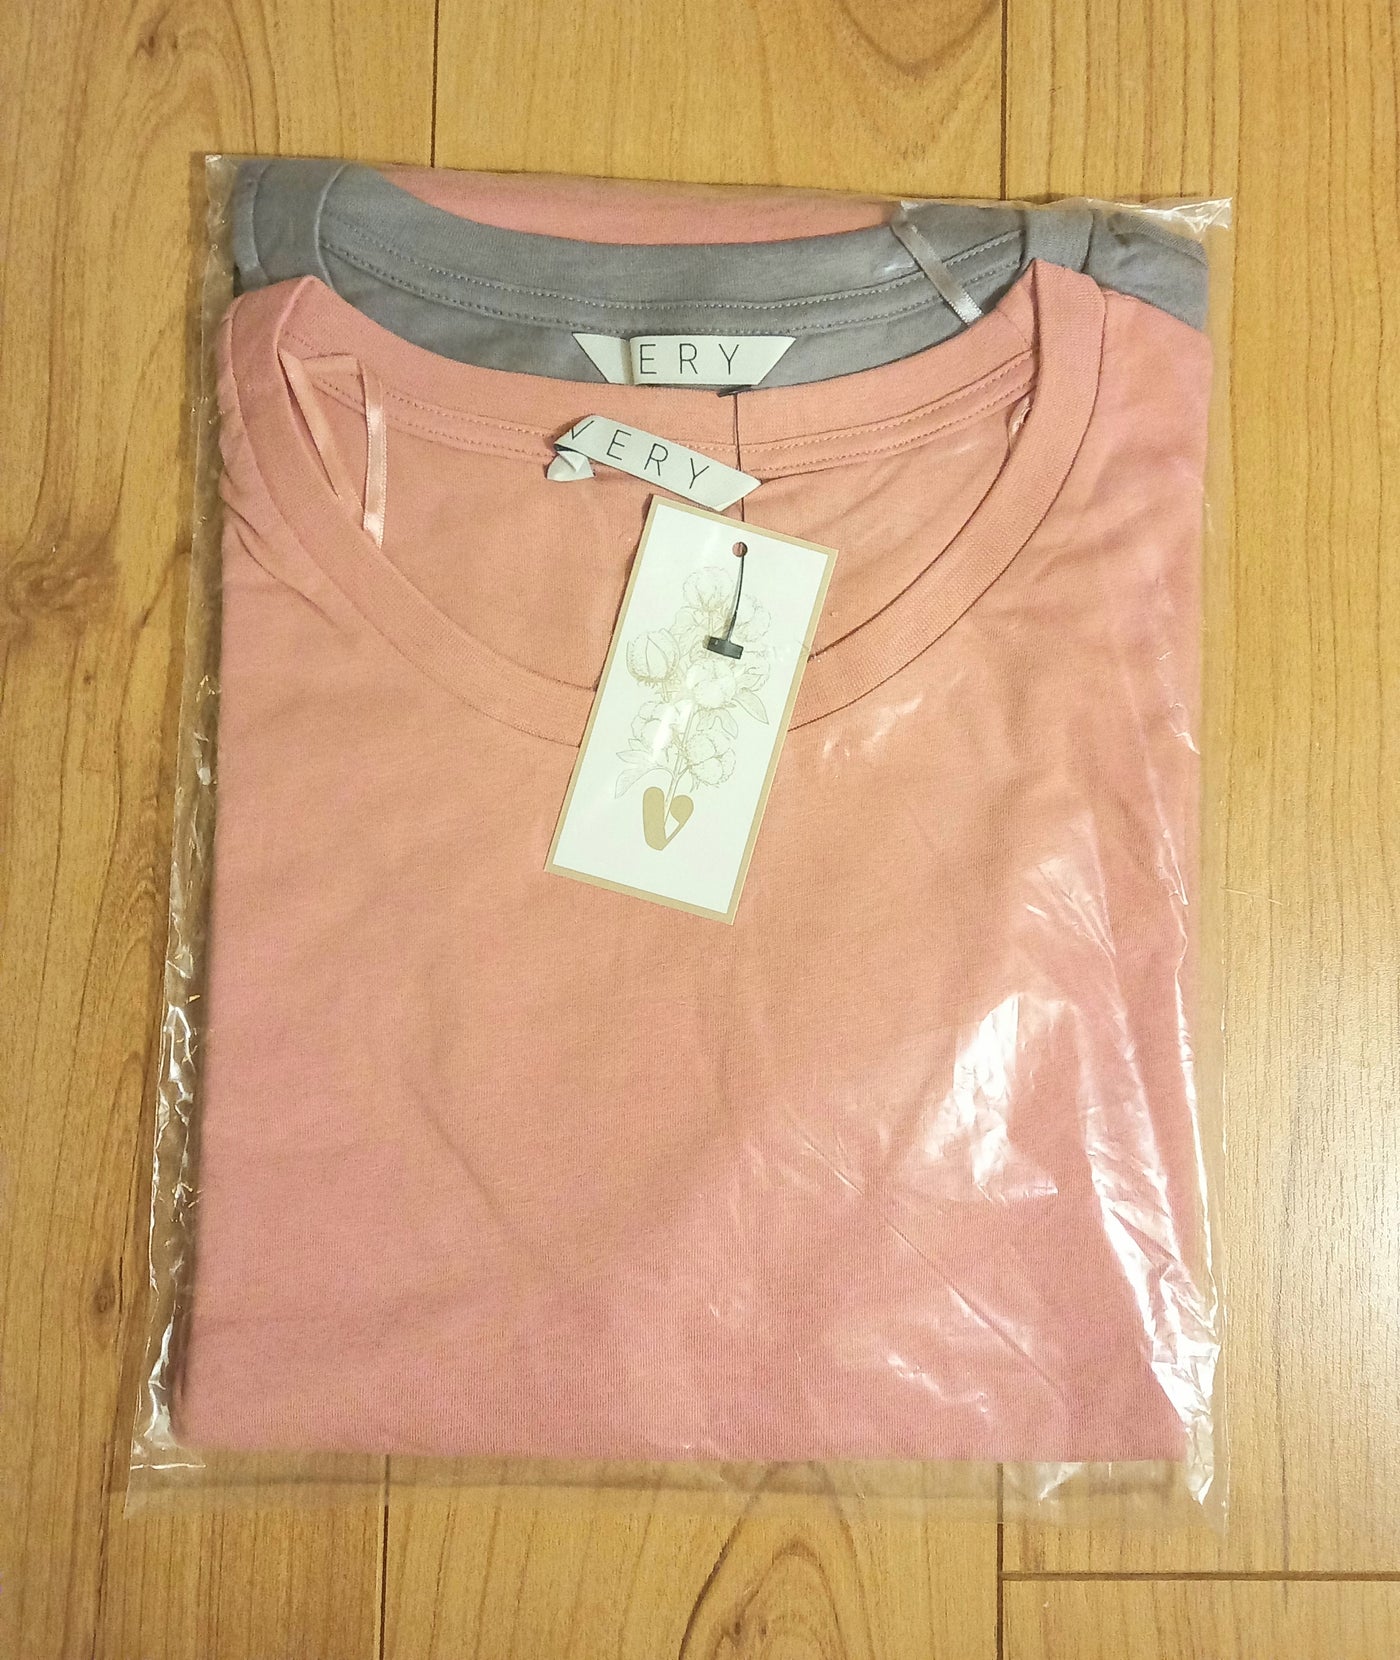 Very Maternity 2 pack Blush Pink & Grey T-Shirt Tops (BNWT) - Size 16